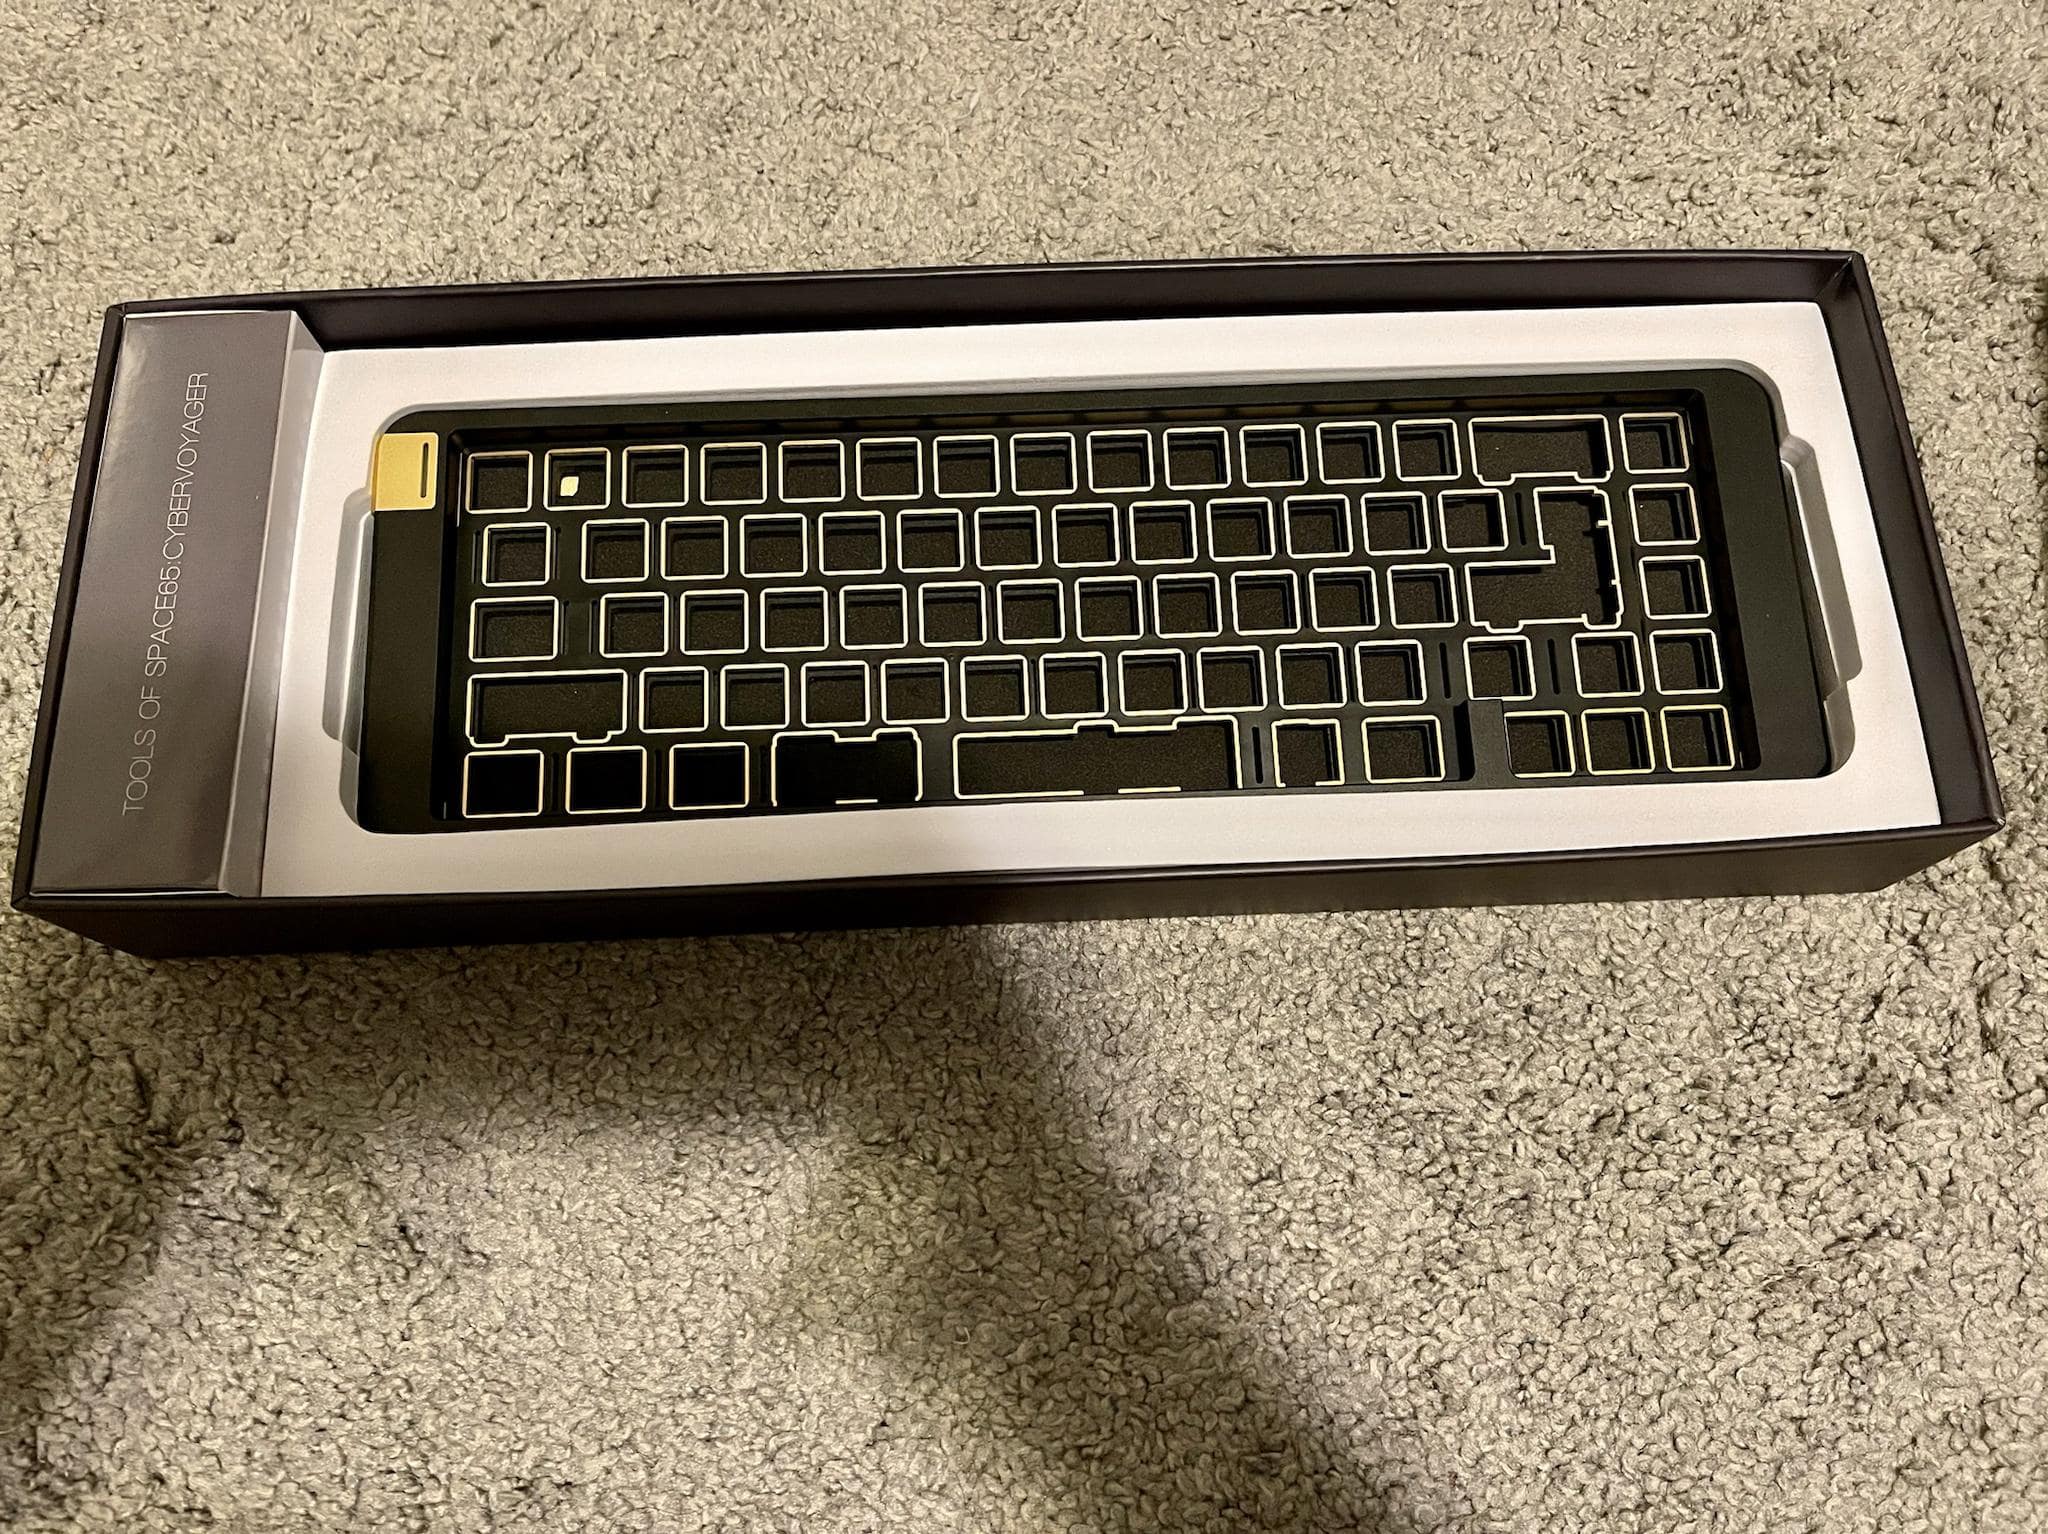 [KFA MARKETPLACE] SPACE65: CyberVoyager R2 Mill Maxed/Hotswap Black case/Gold weight/White badge/Gold LED badge / FR4 & Pom plate Bundle - KeebsForAll